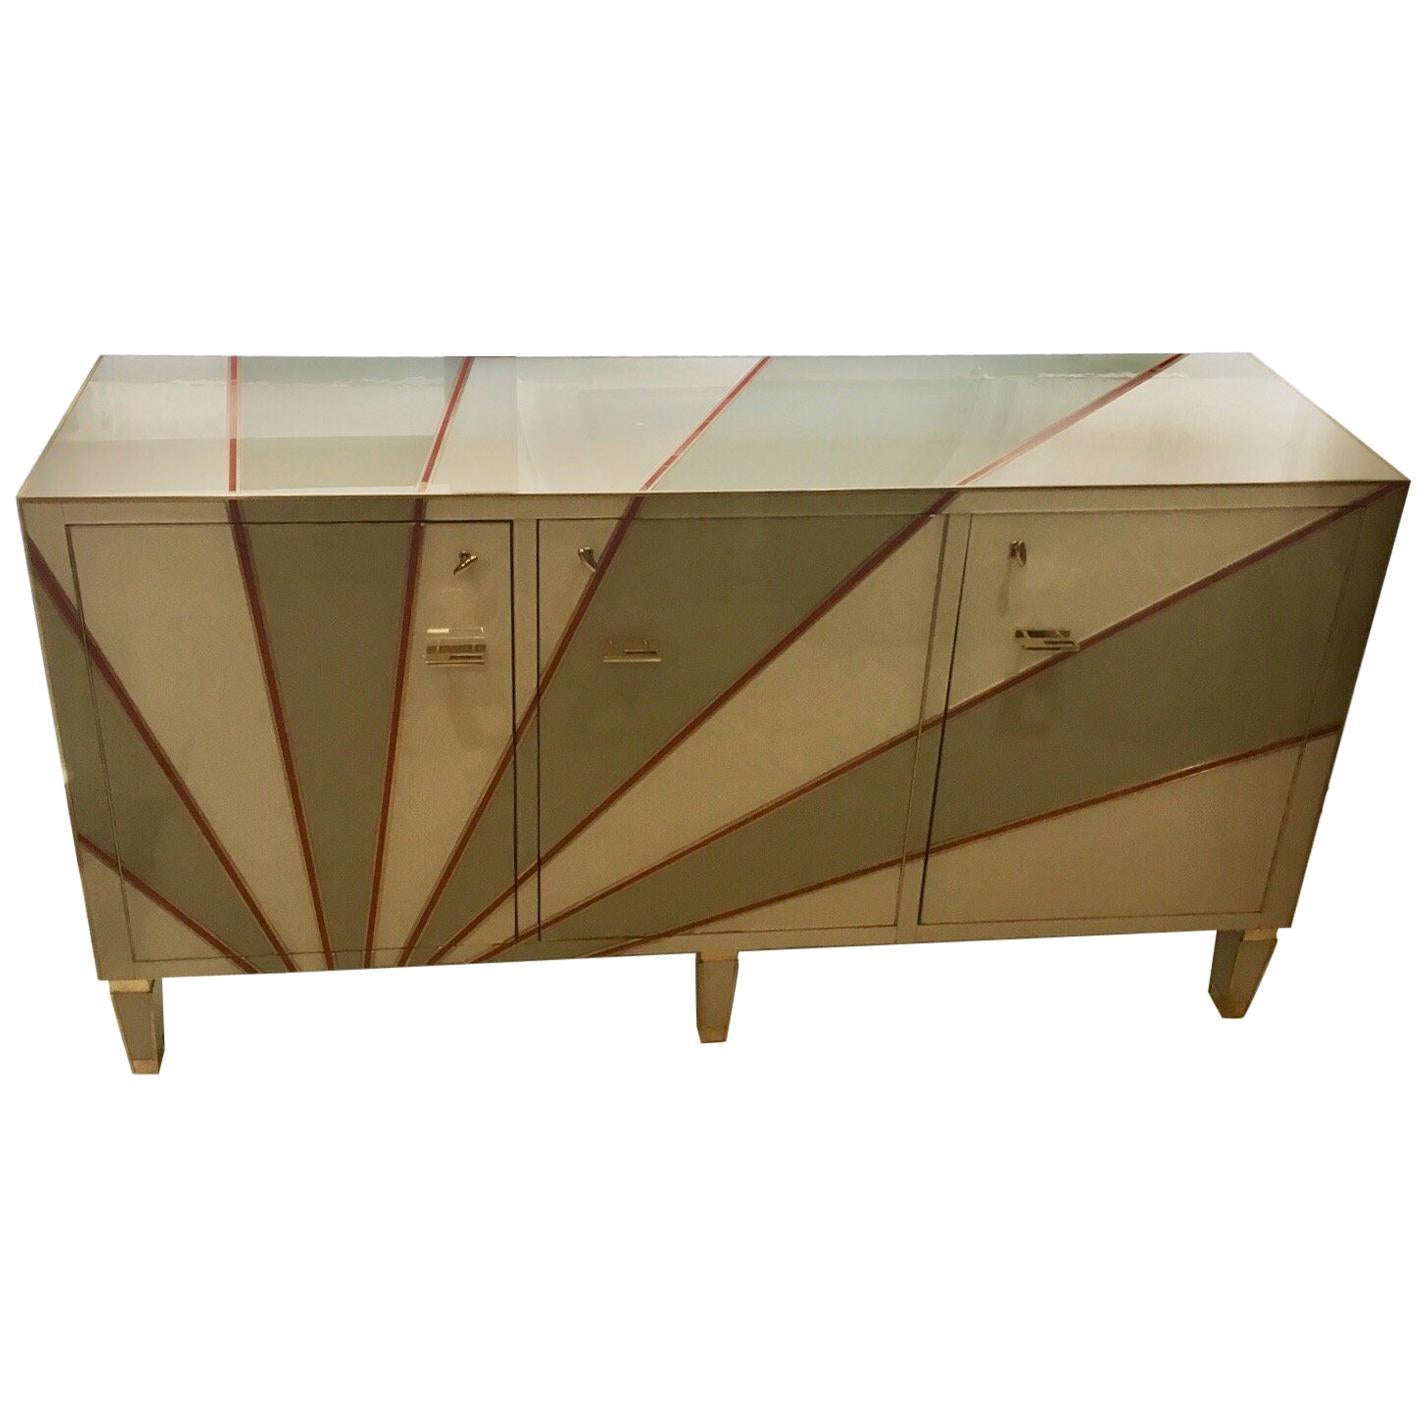 Multicolored Opaline Glass Credenza Geometrical Design and Brass Edges, 1970s